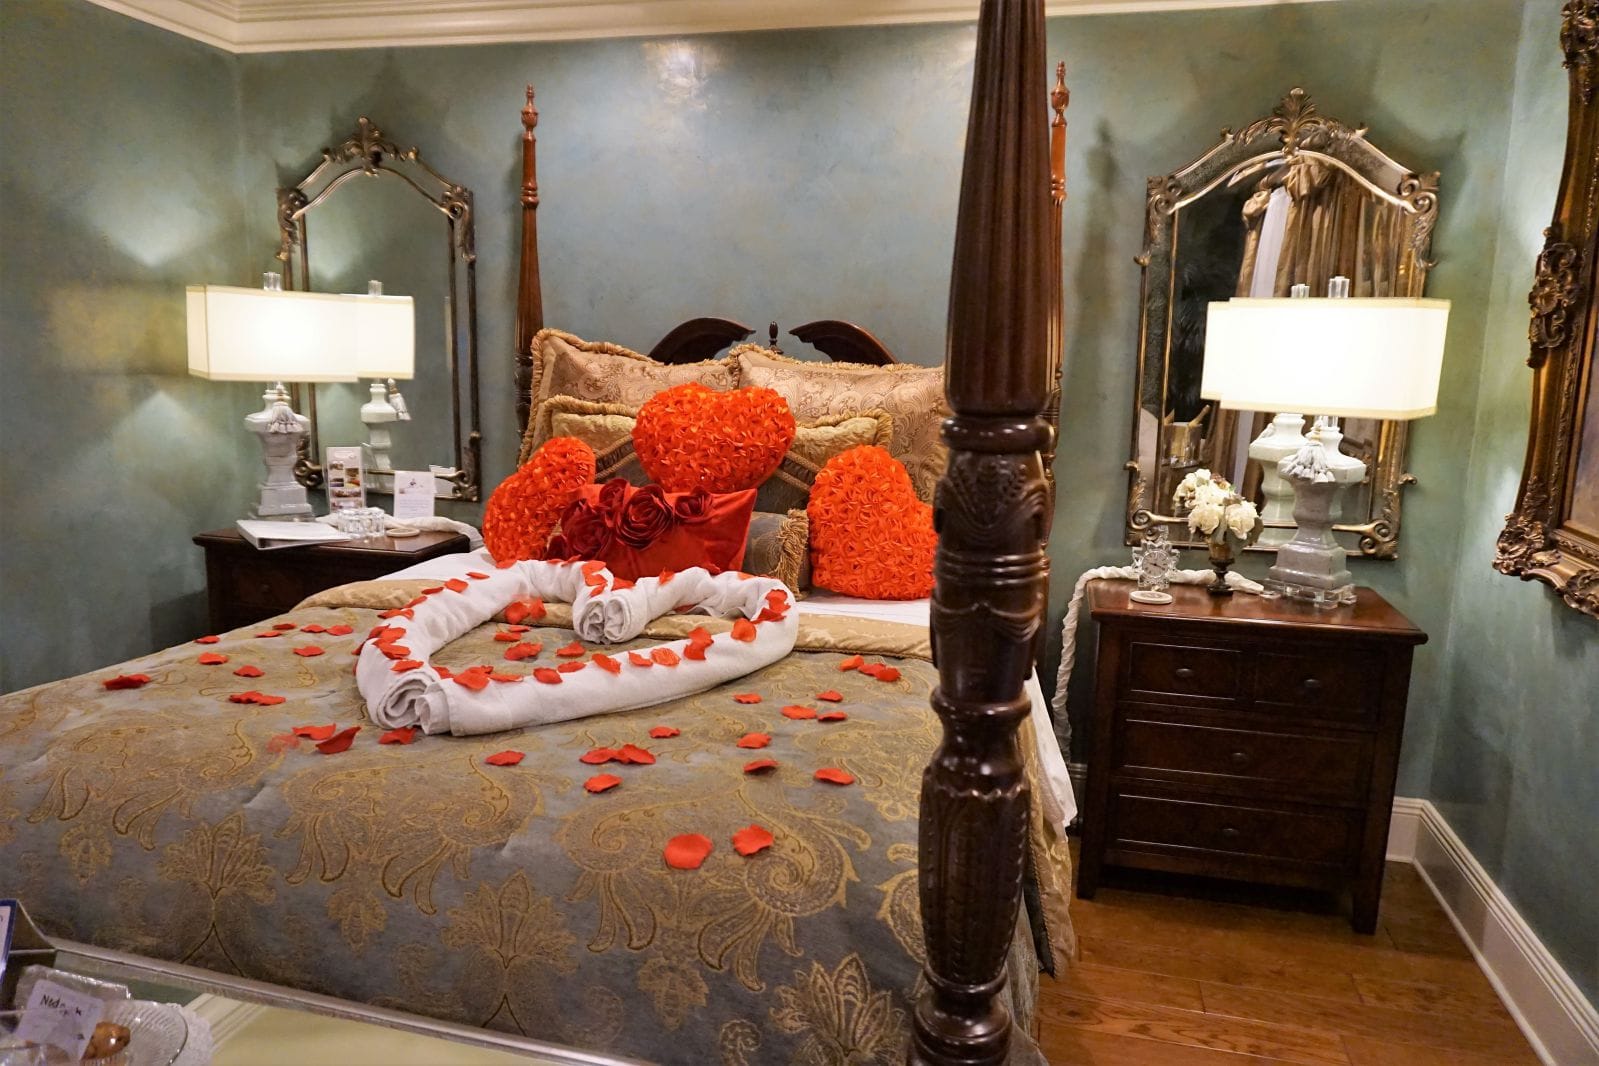 Bridal suite with rose pedals on the bed at louisiana cajun mansion bed and breakfast